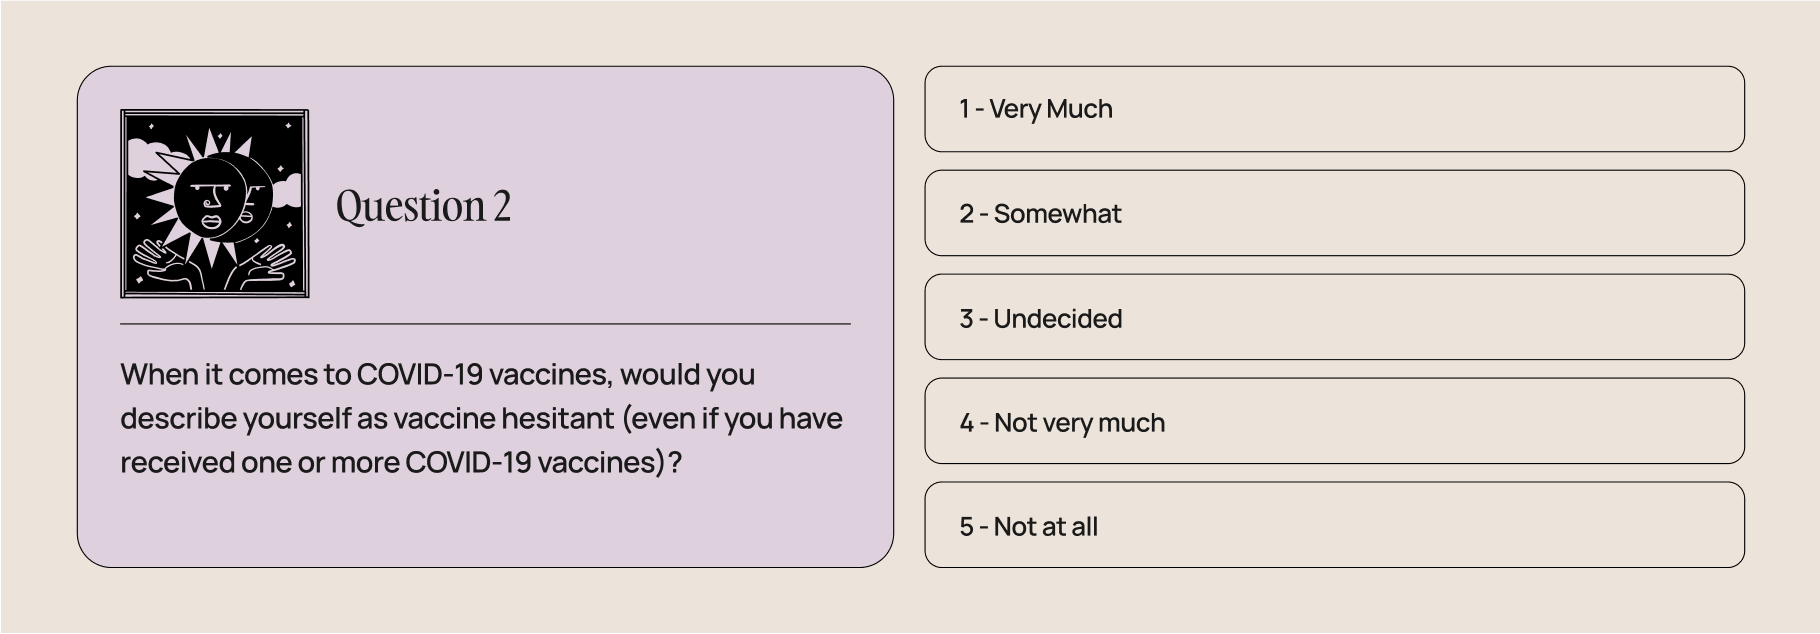 A screenshot of a question presented in the Moving at the speed of trust experience reads: "When it comes to COVID-19 vaccines would you describe yourself as vaccine hesitant (even if you have received one of more COVID-19 vaccines)? 5 answer options are shown: Very much, somewhat, undecided, not very much, and not at all.